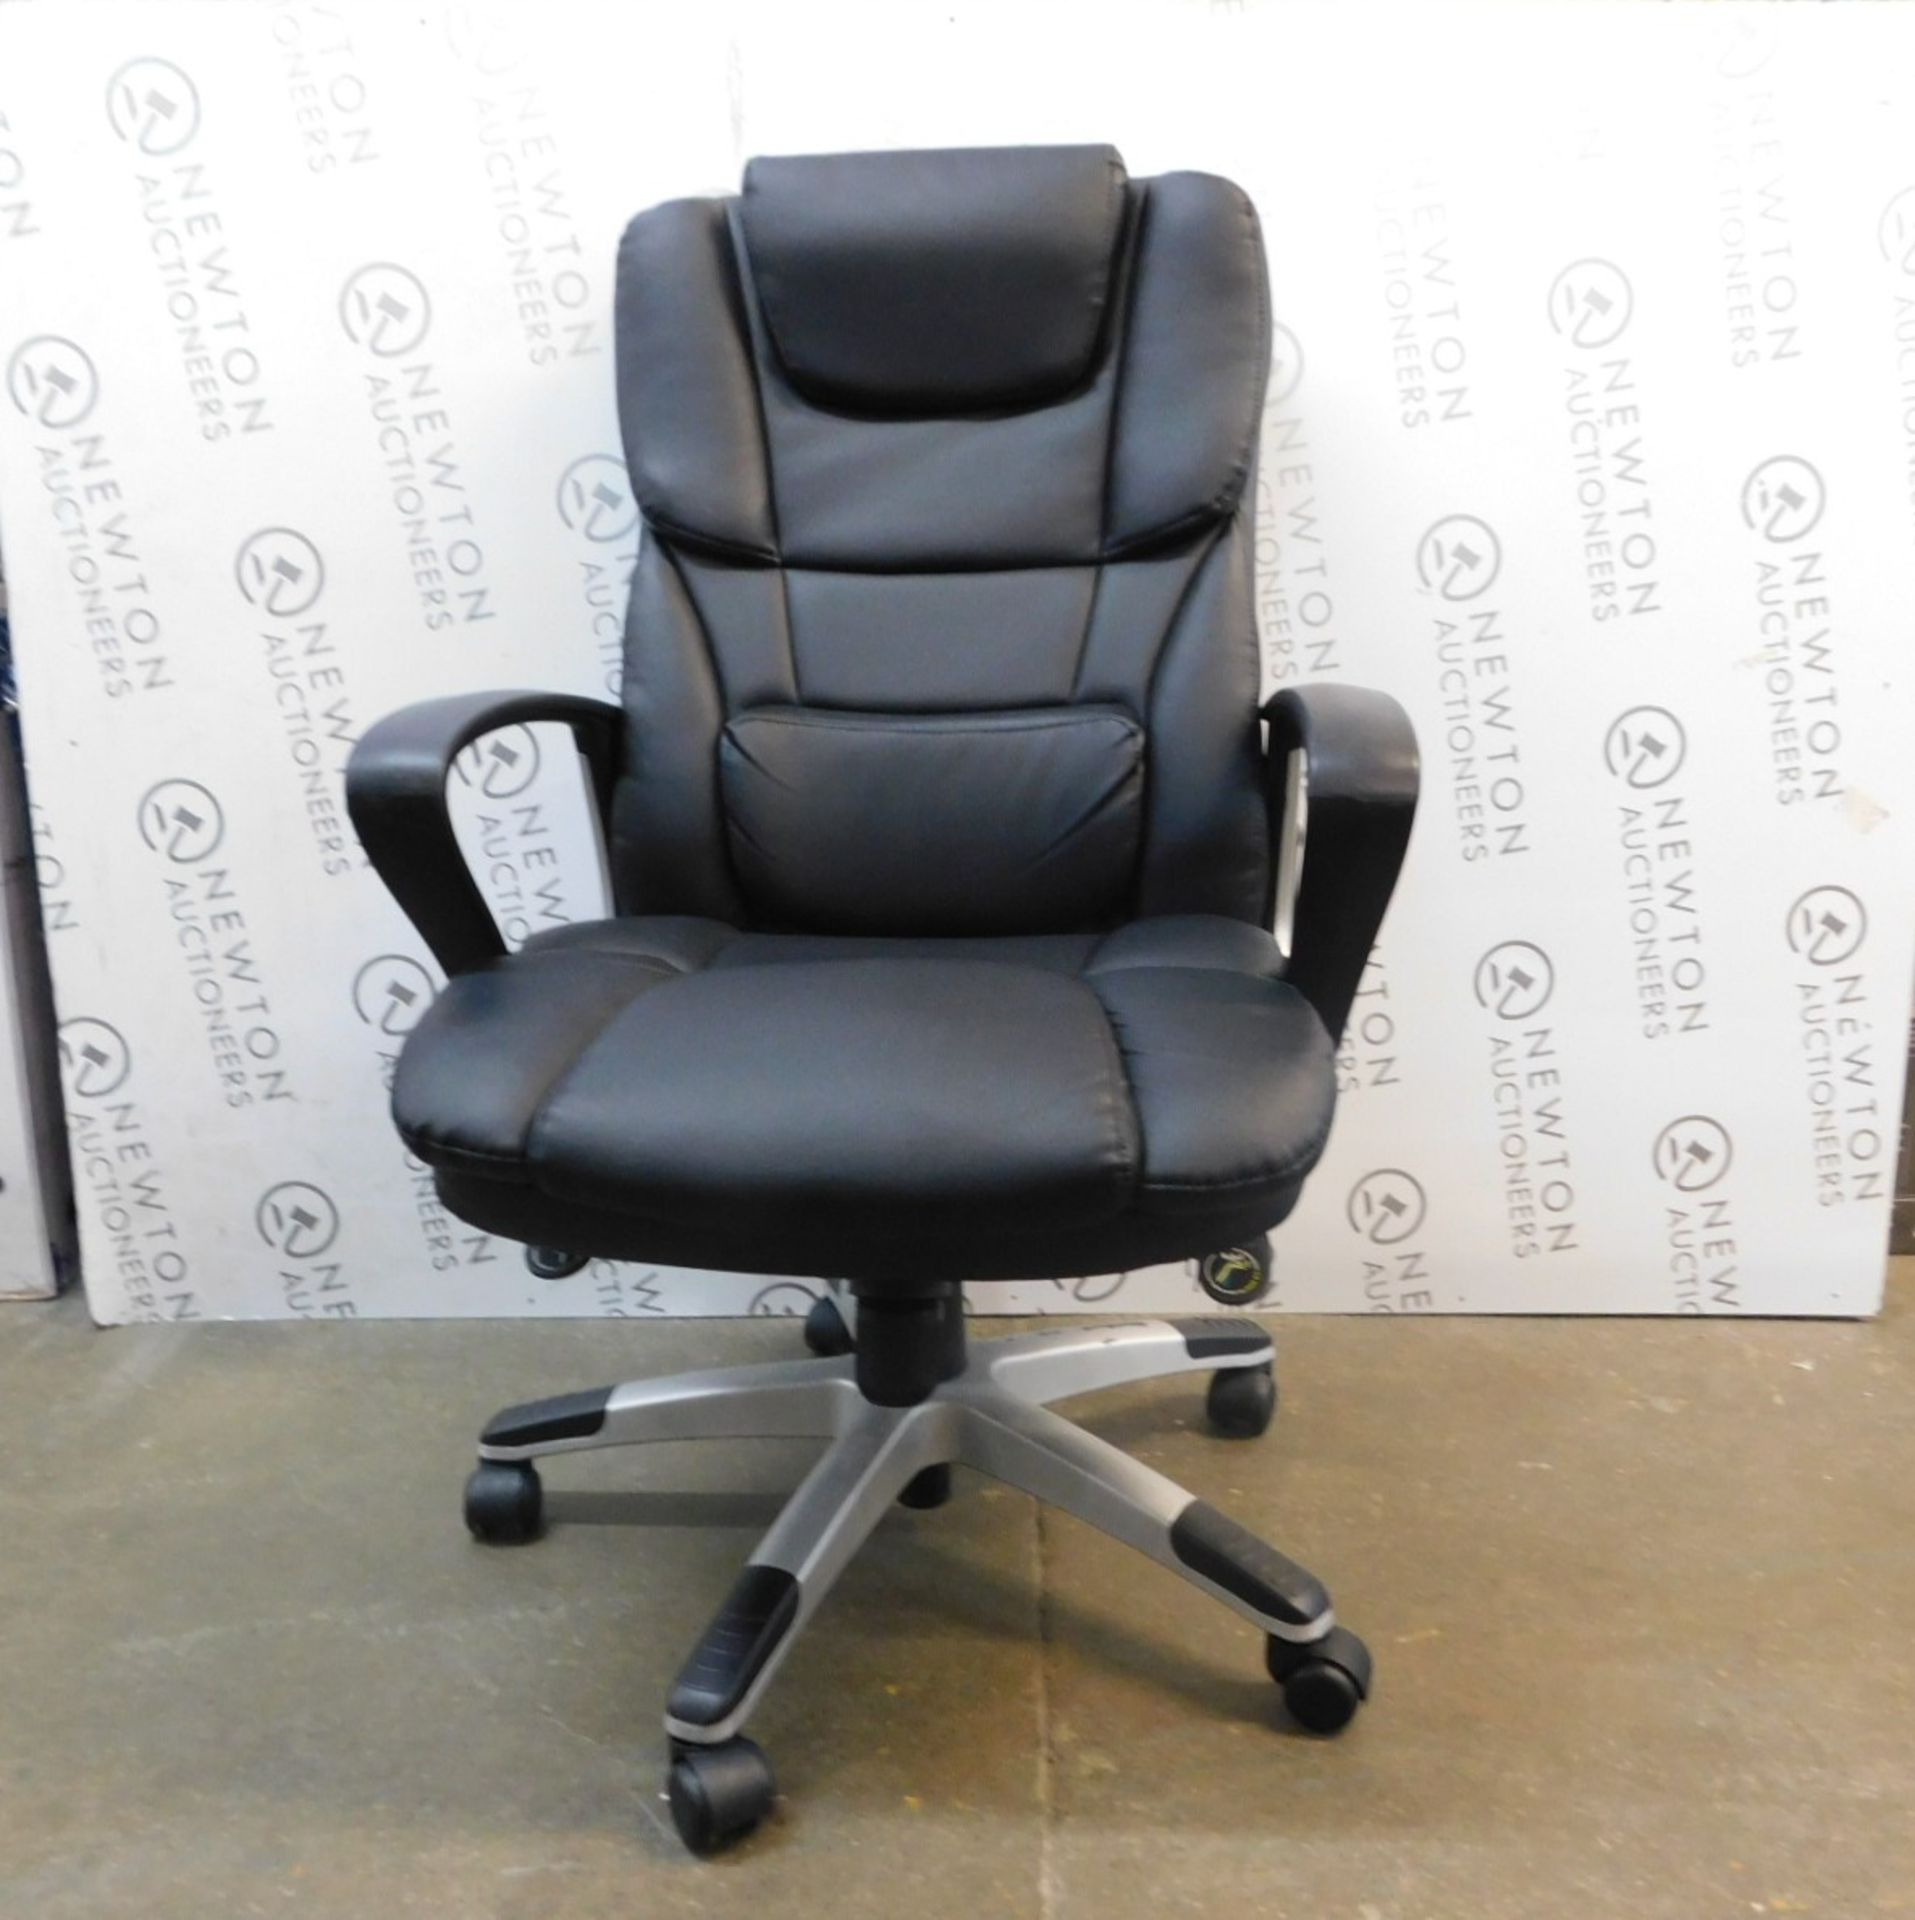 1 PALERMO LEATHER FACED EXECUTIVE CHAIR IN BLACK RRP Â£149